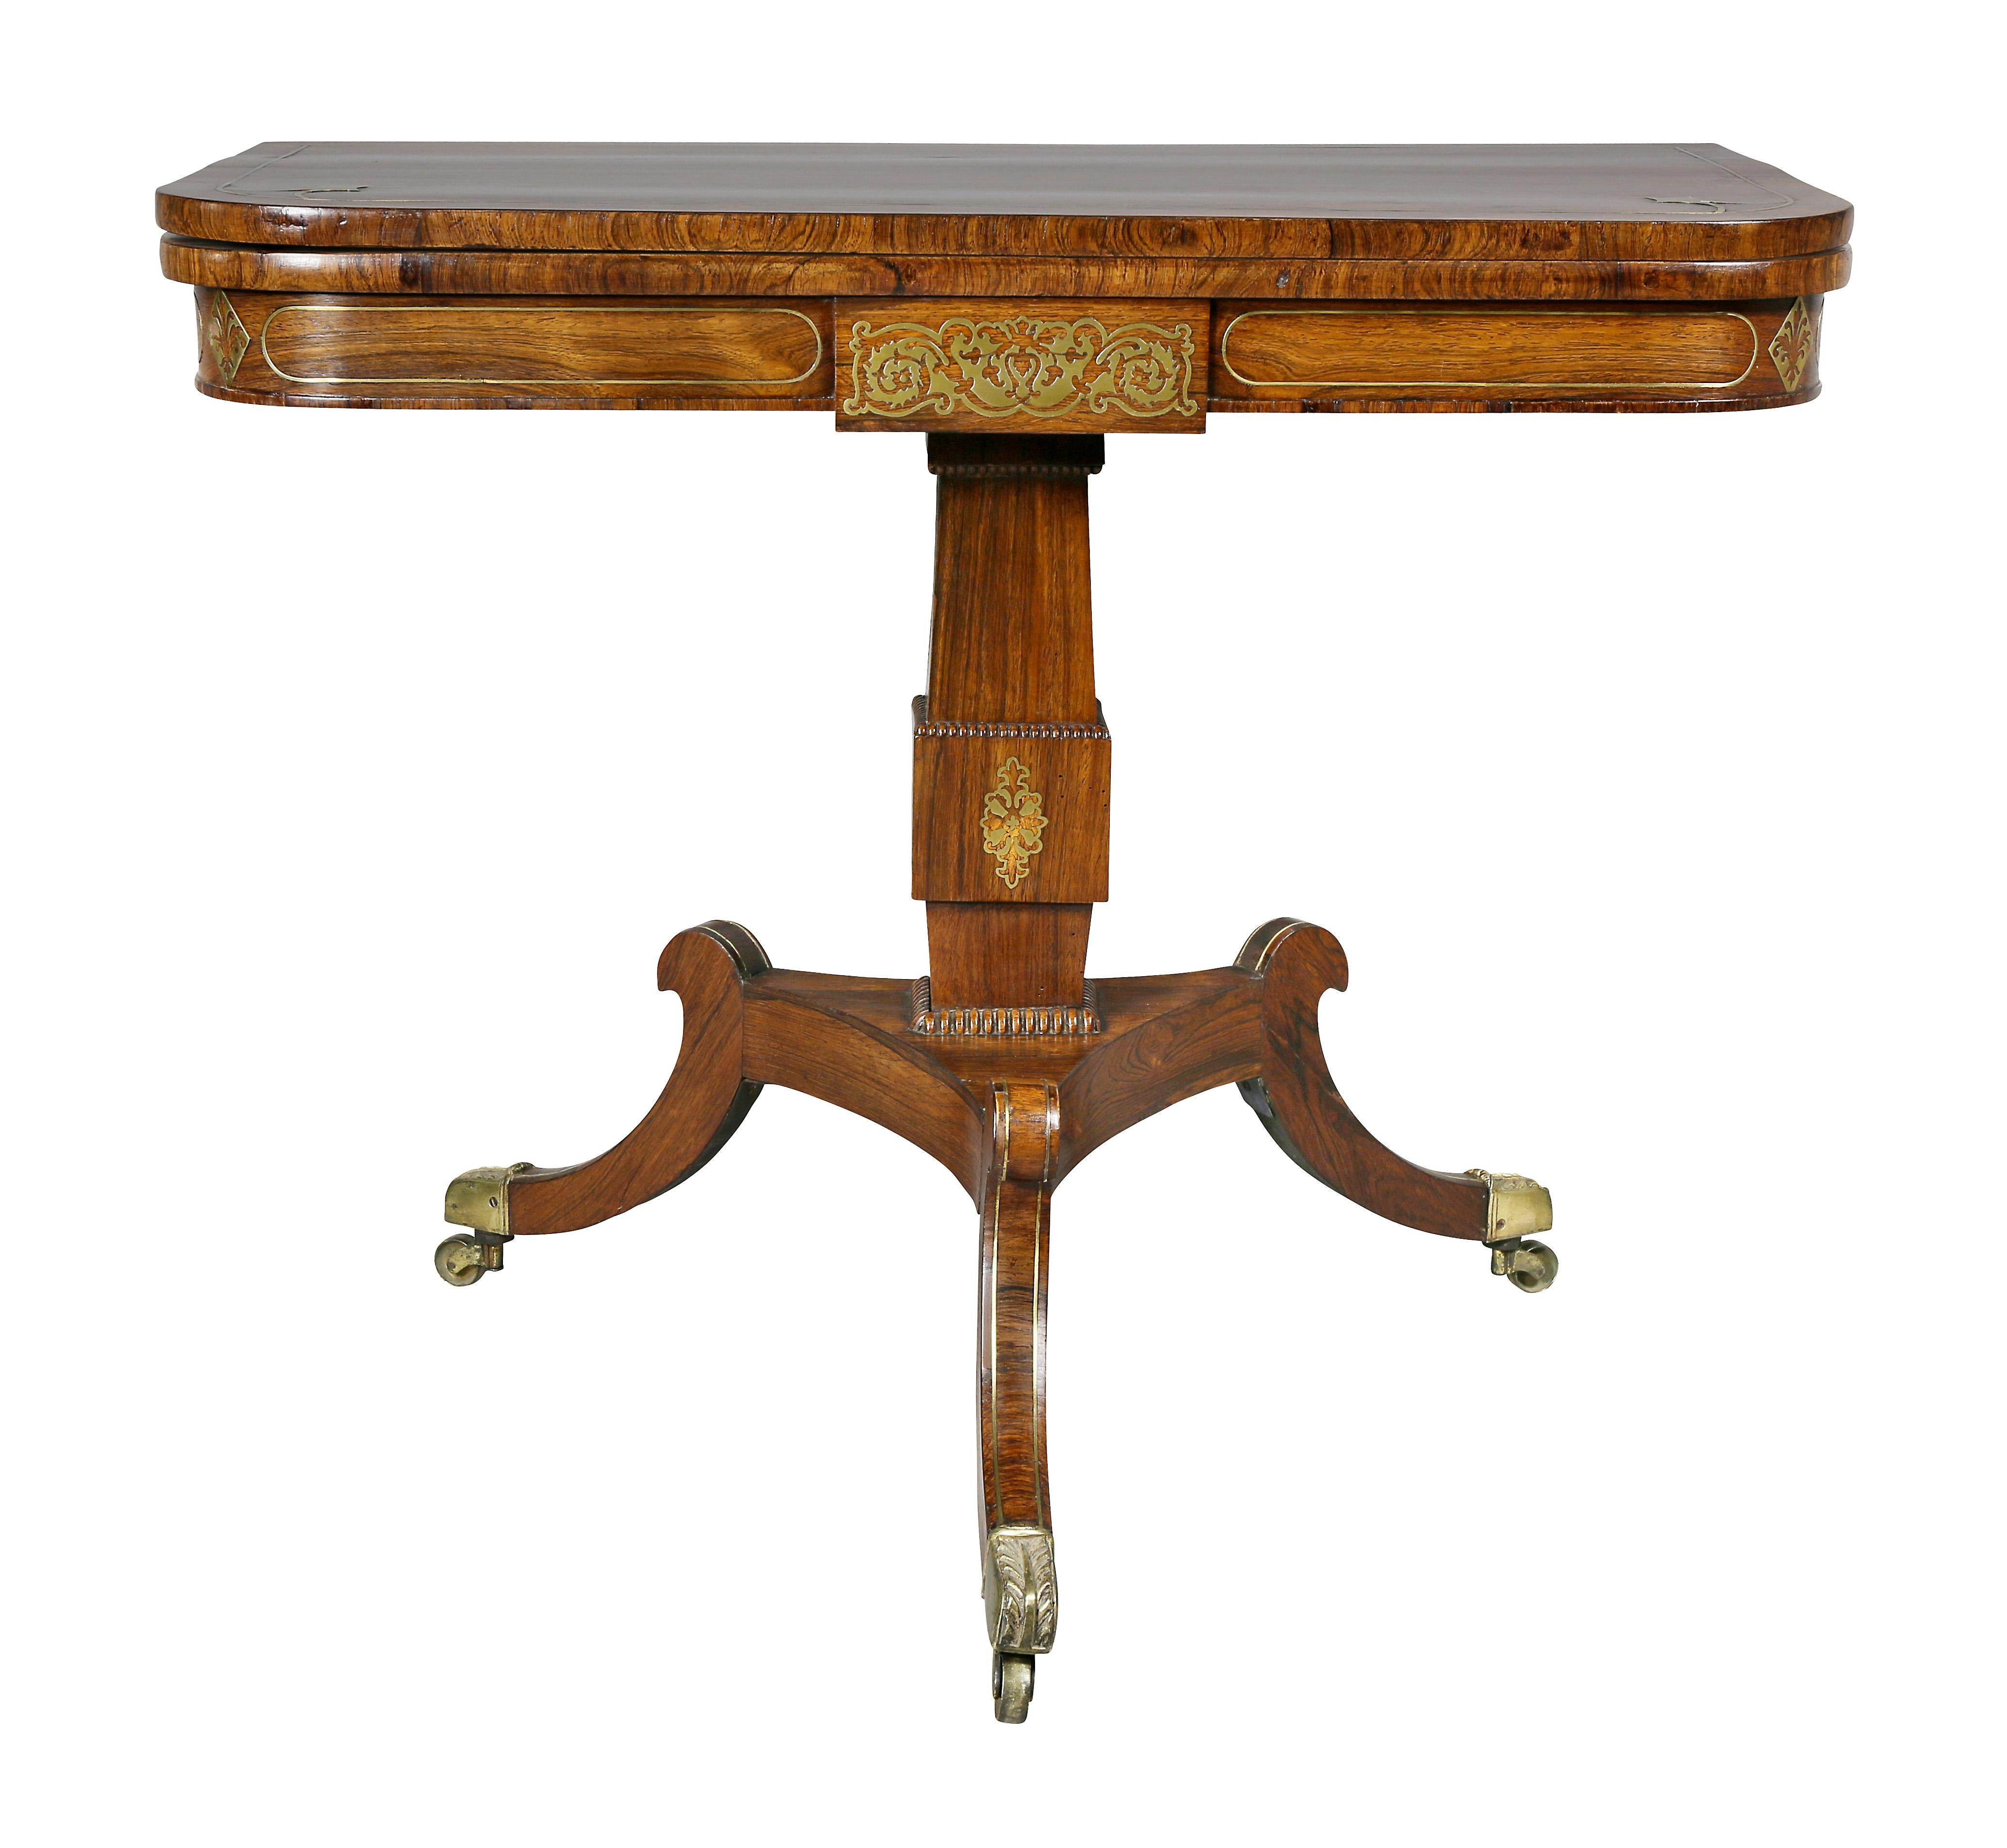 Rectangular hinged top opening to a rosewood playing surface, brass inlaid central panelled frieze with overall stringing, square section support ending on three saber legs and casters.